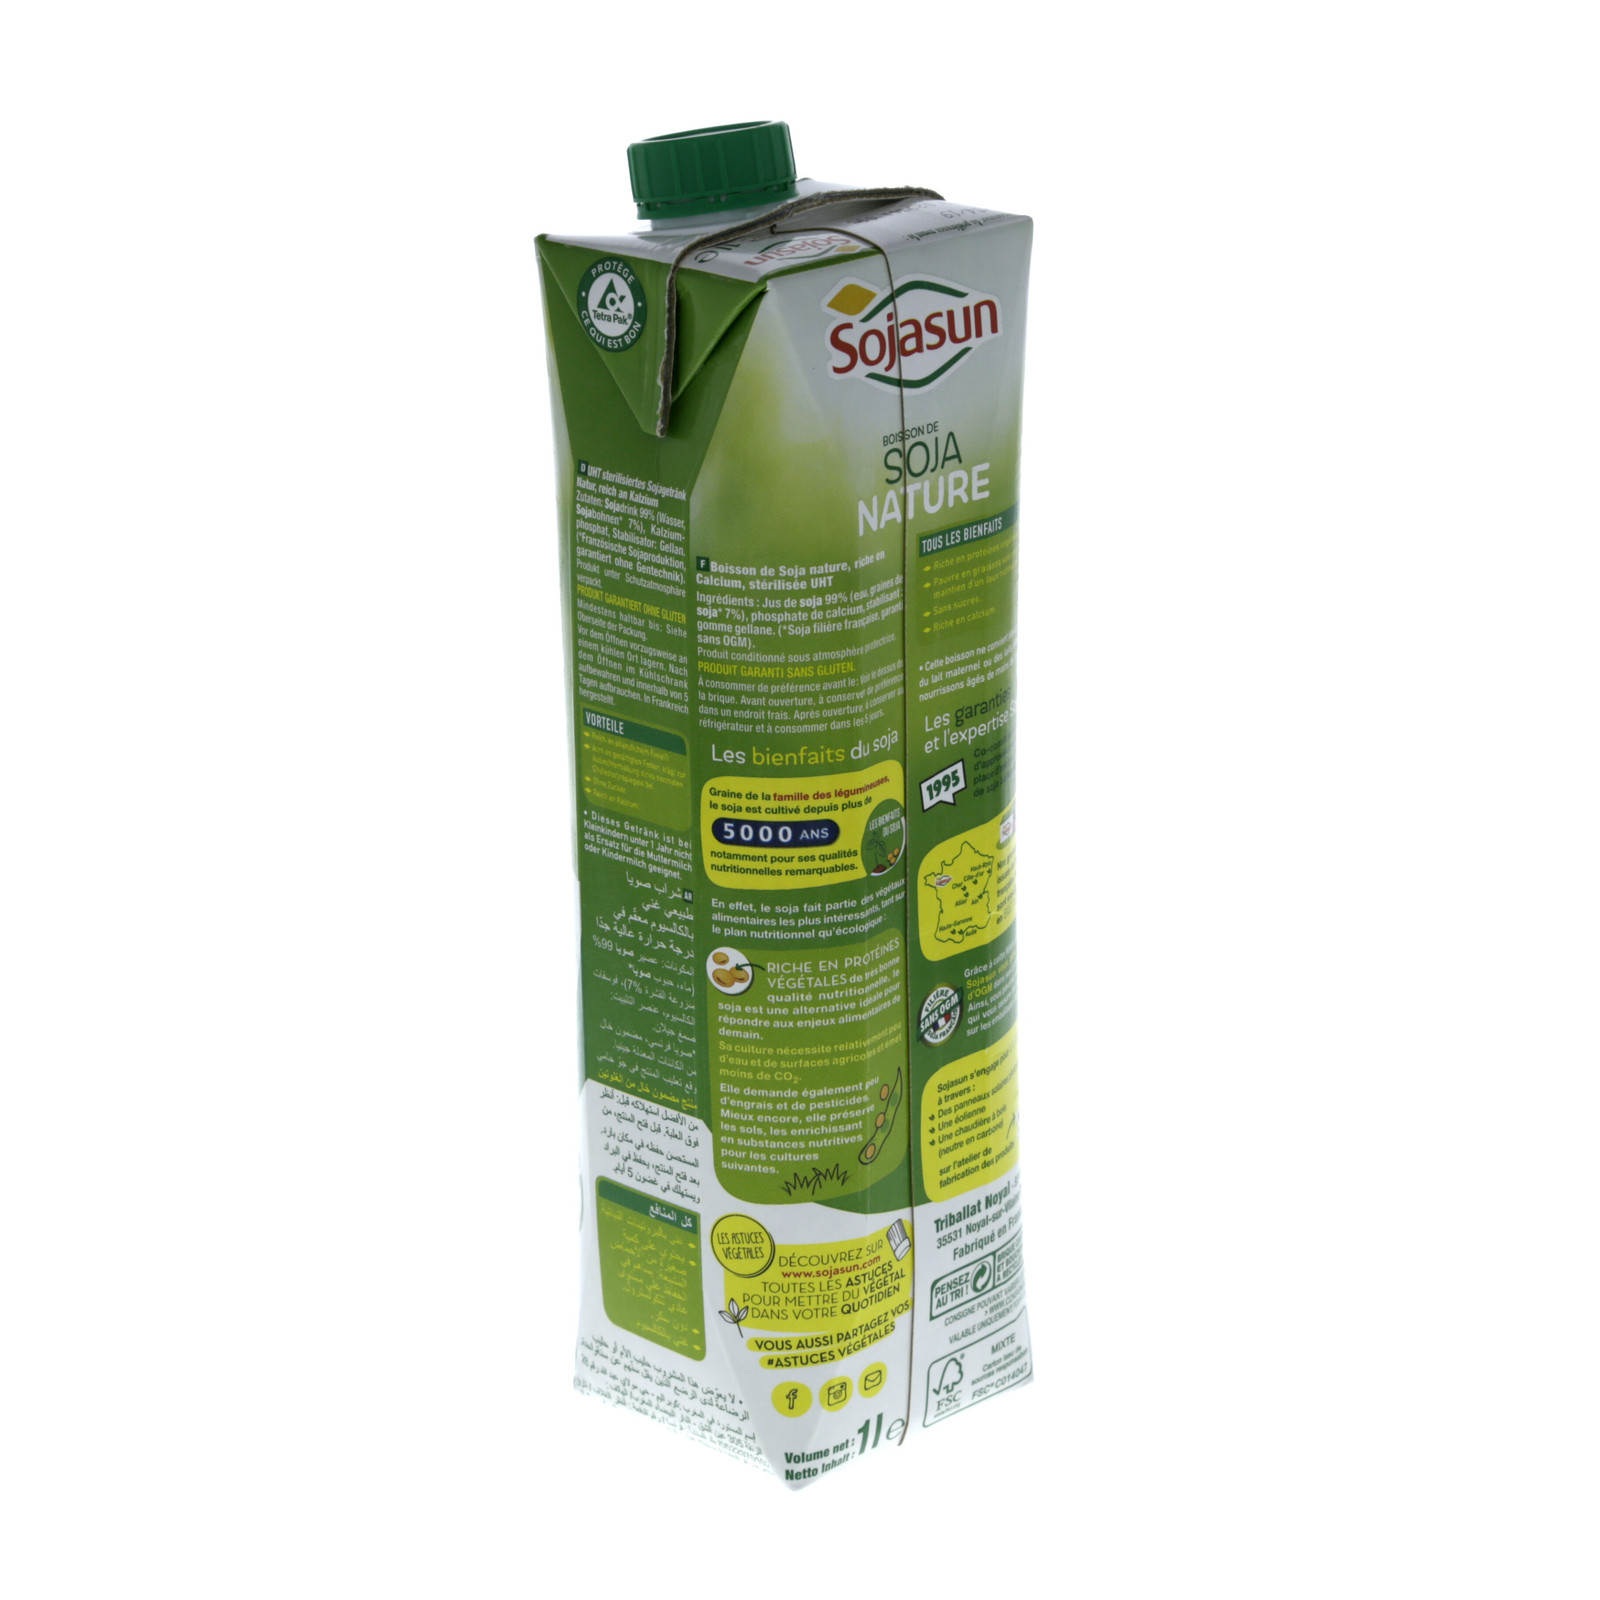 Sojasun Natural Soya Drink All the benefits of soy in an ideal drink for sweet and savory culinary preparations.